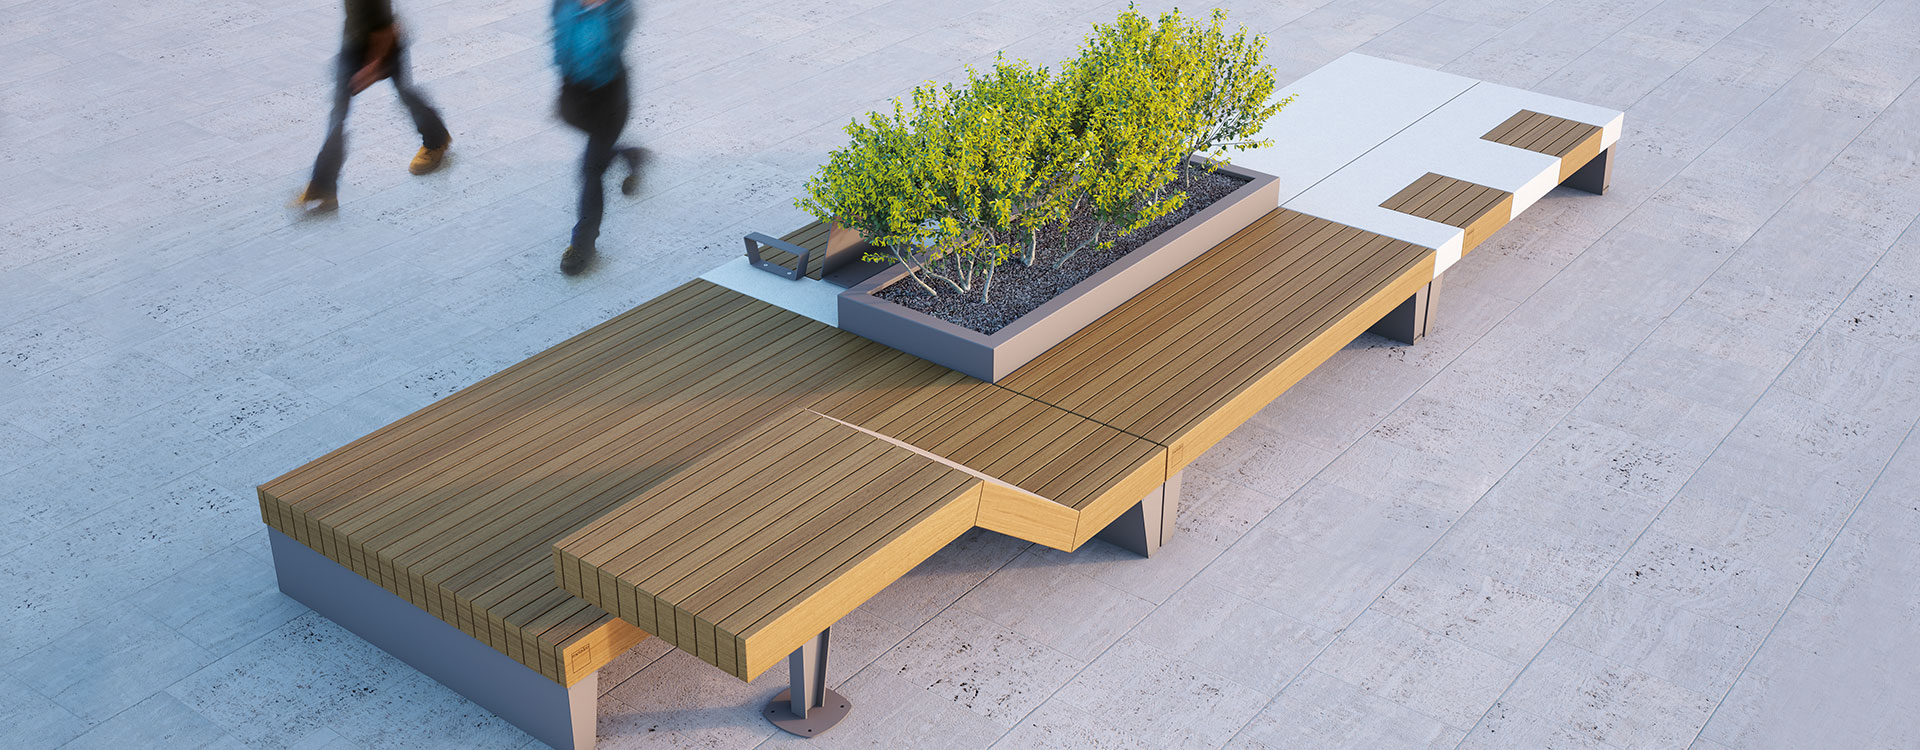 Introducing the Isolaurbana Seating and Planter Collection